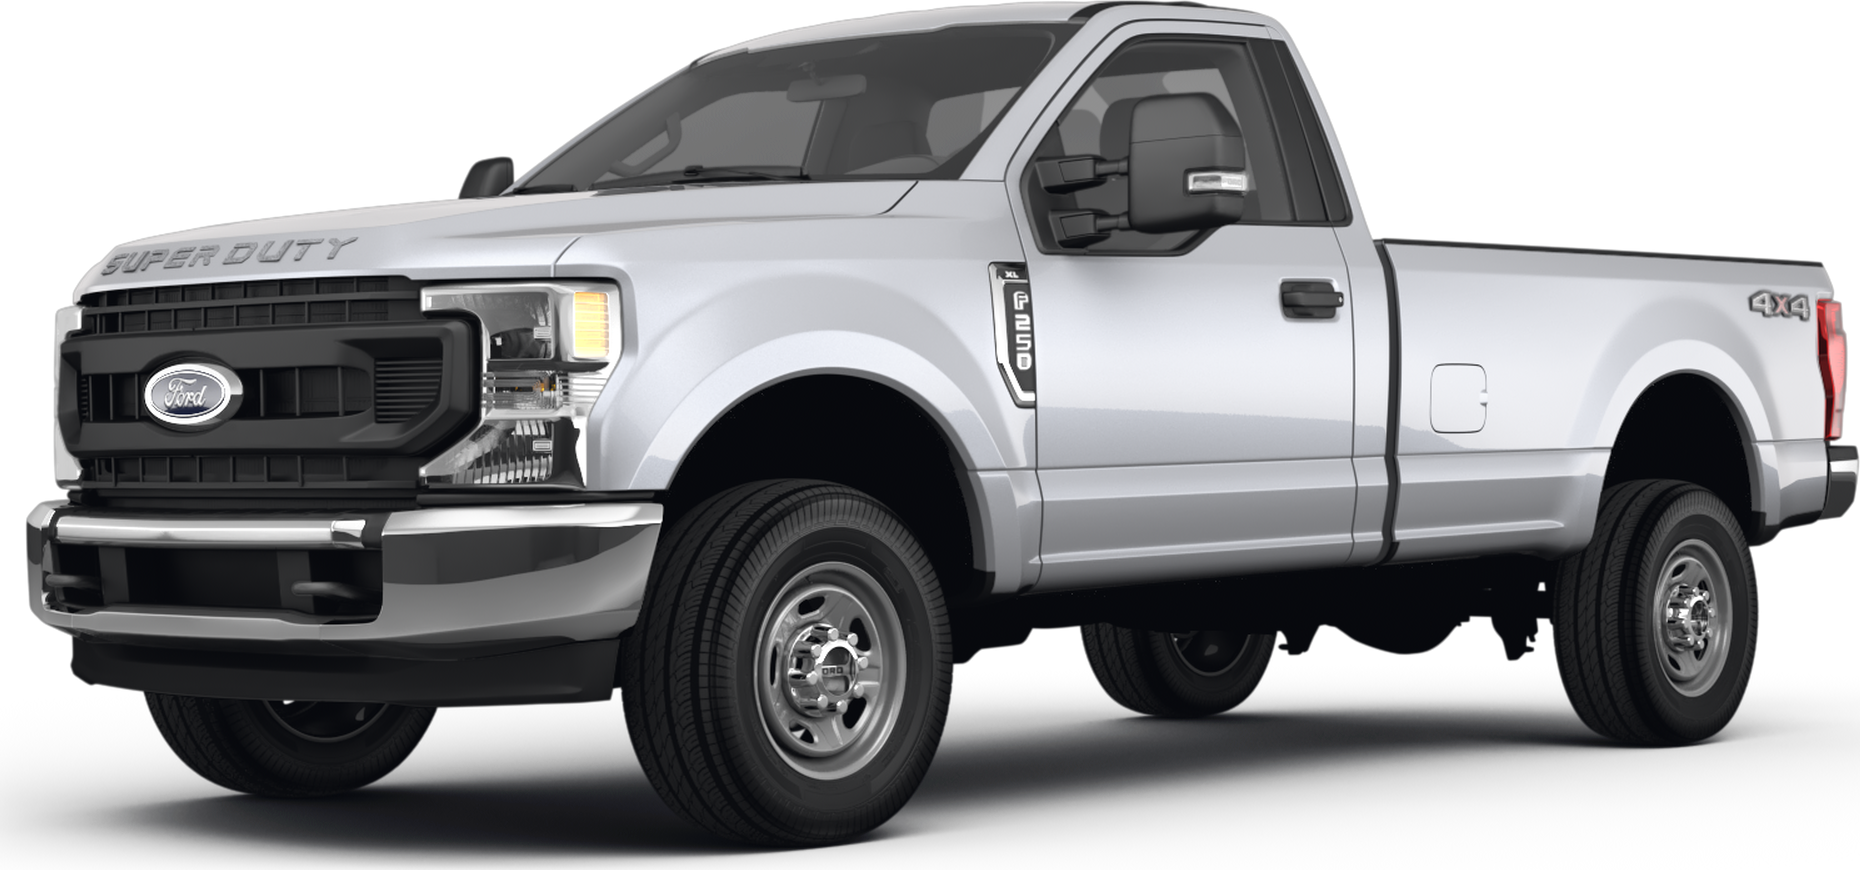 New 2023 Ford F250 Super Duty Regular Cab Reviews Pricing Specs Hot